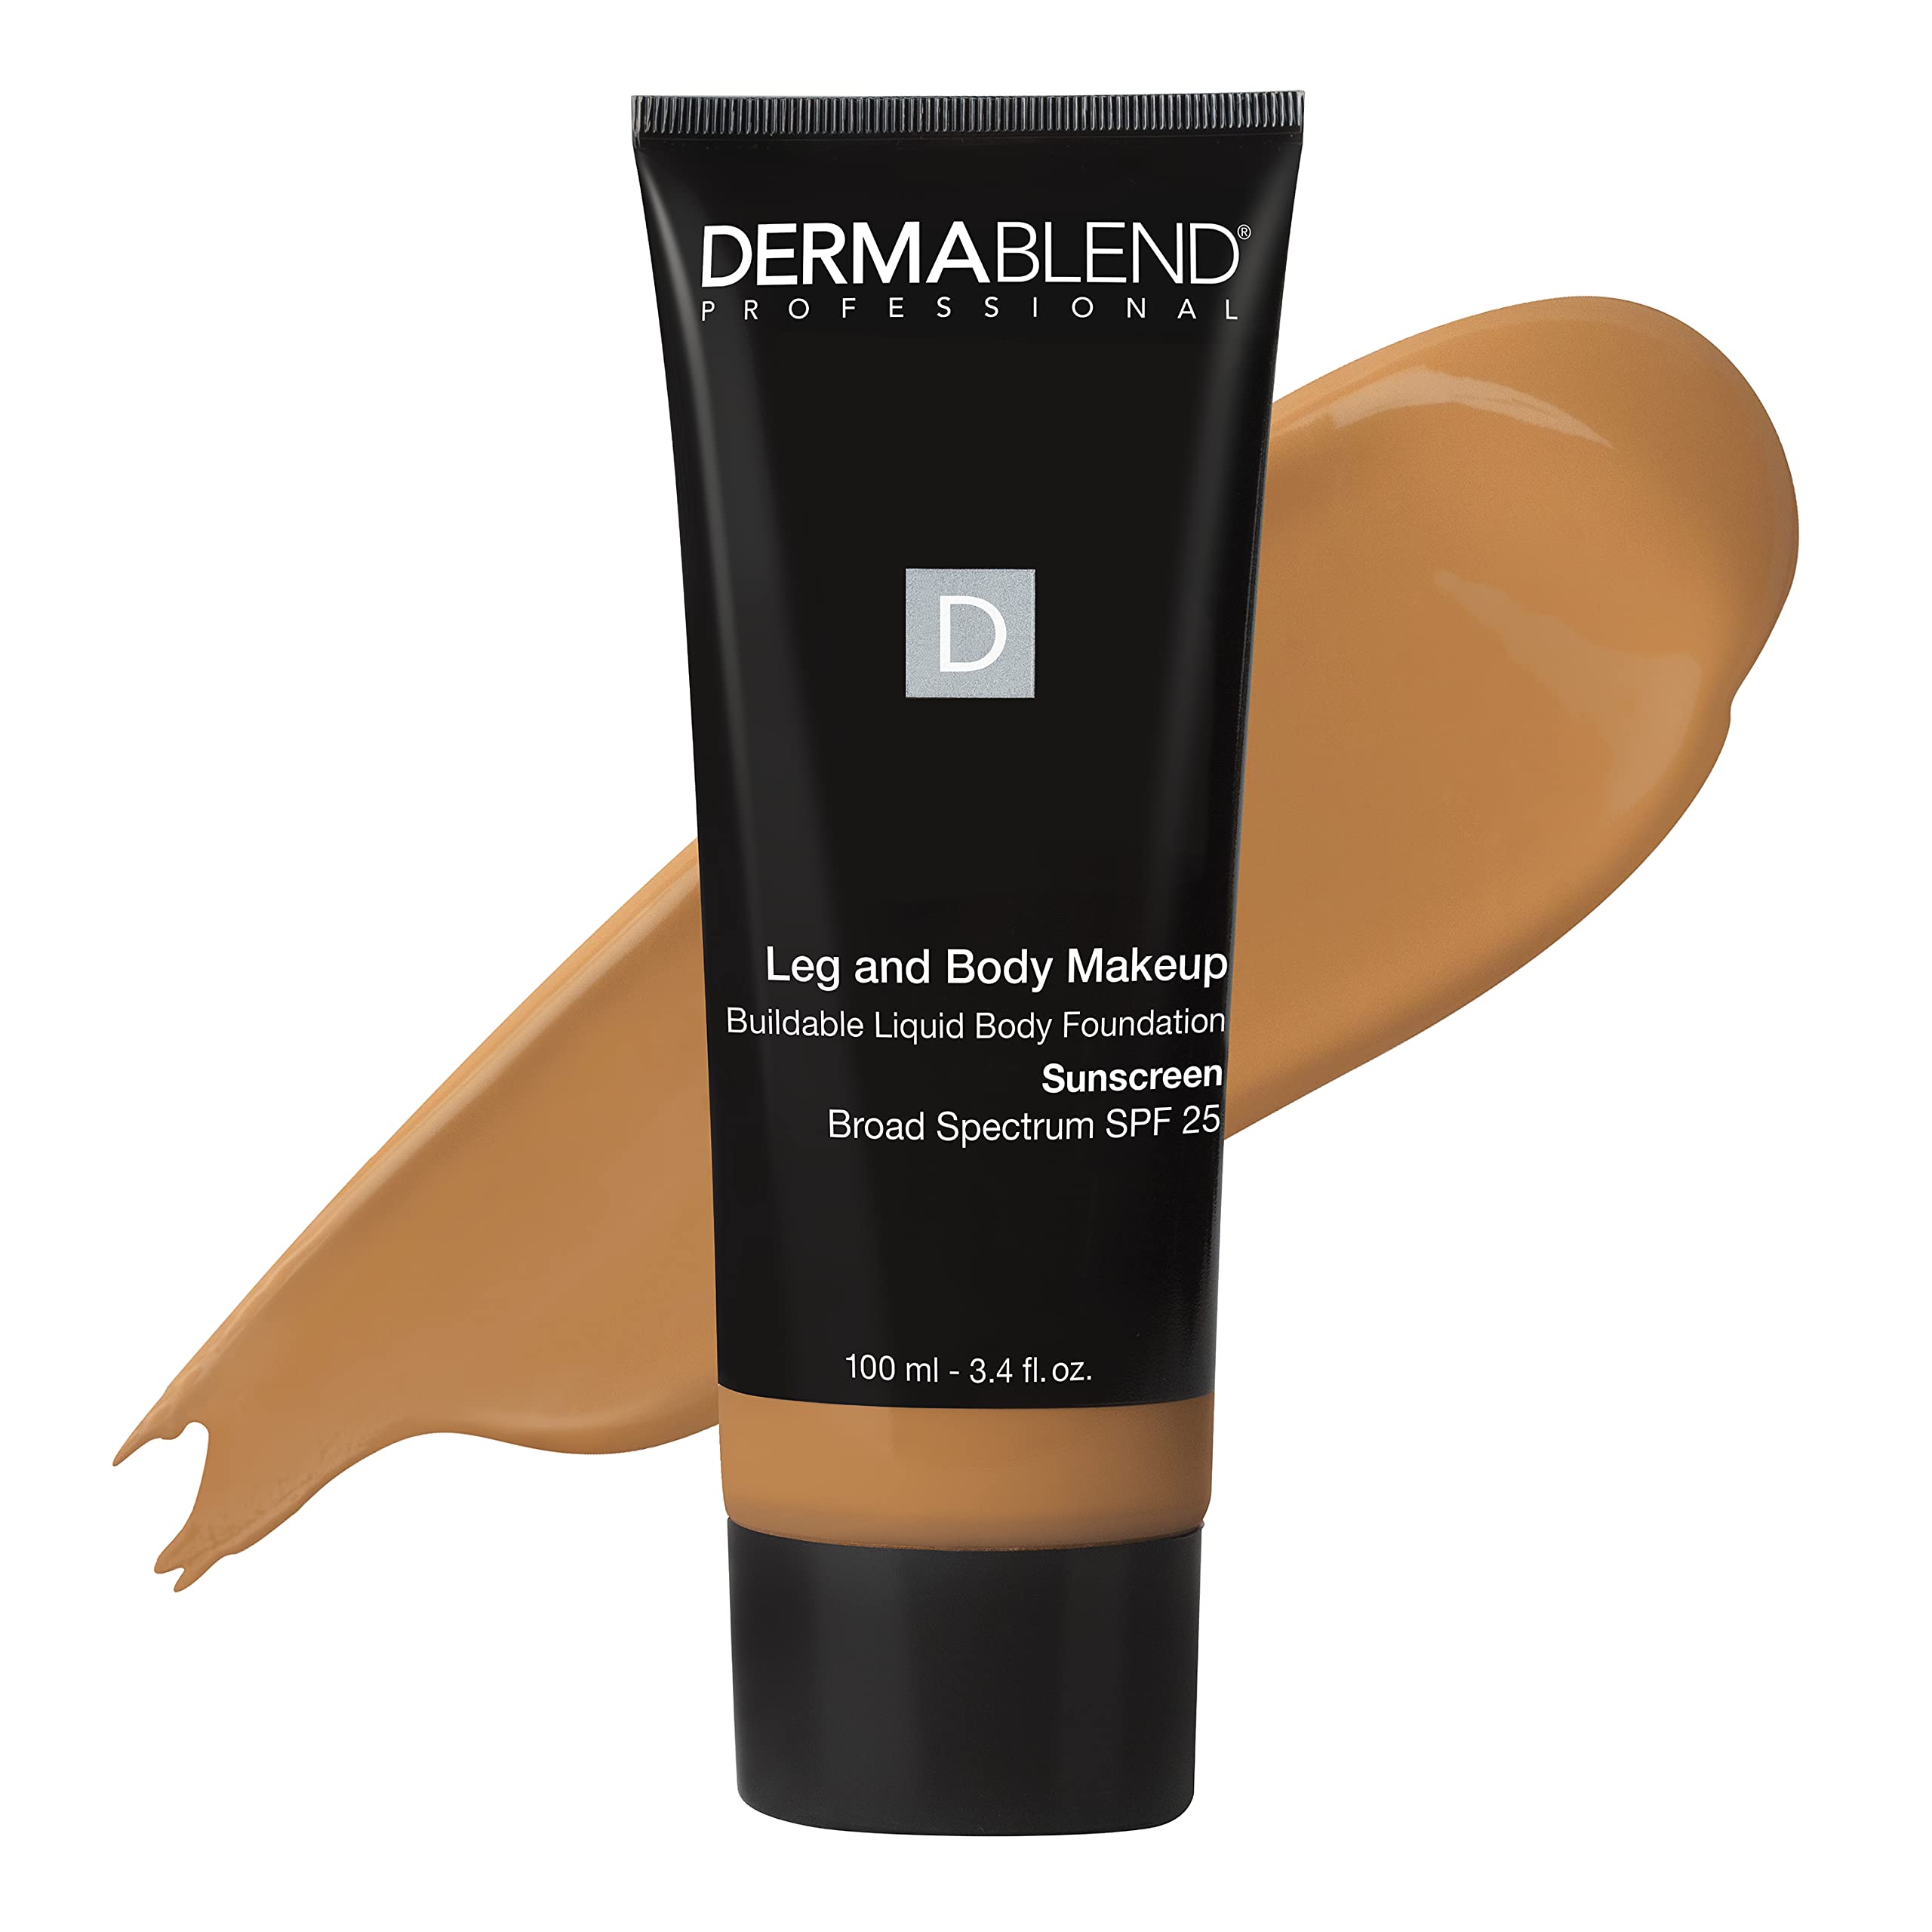 Dermablend Leg and Body Makeup Foundation with SPF 25, 45W Tan Honey, 3.4 Fl. Oz.